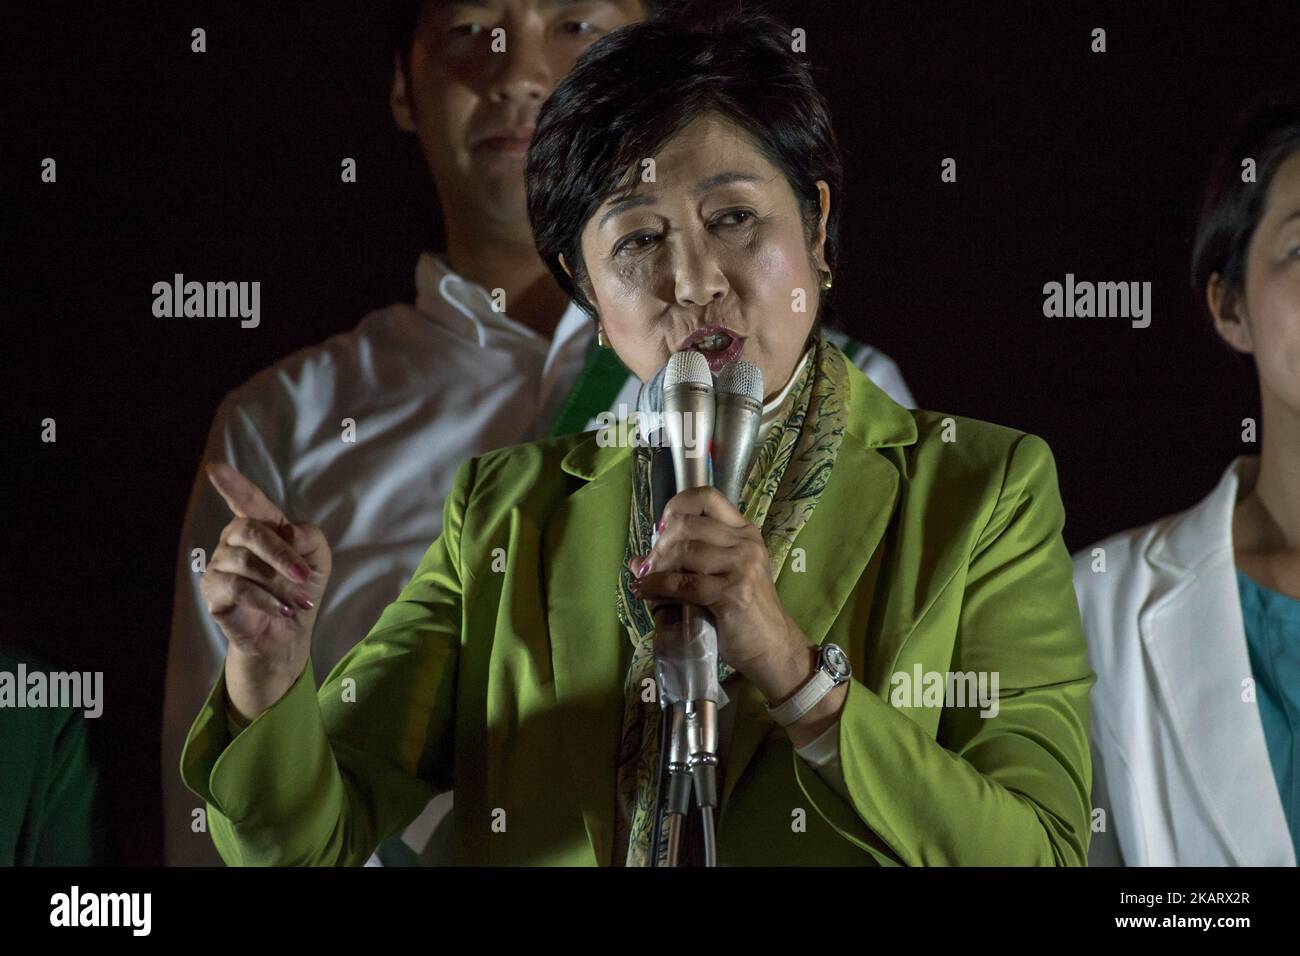 Tokyo Governor and Kibo no To (Party of Hope) leader Yuriko Koike gives a speech during his political rally in Yokohama, Japan, October 12, 2017. The general election vote will be held on October 22, 2017. Prime Minister Shinzo Abe’s ruling LDP is expecting to win the October 22, general election while Koike's party is lagging behind, according to a survey. (Photo by Alessandro Di Ciommo/NurPhoto) Stock Photo